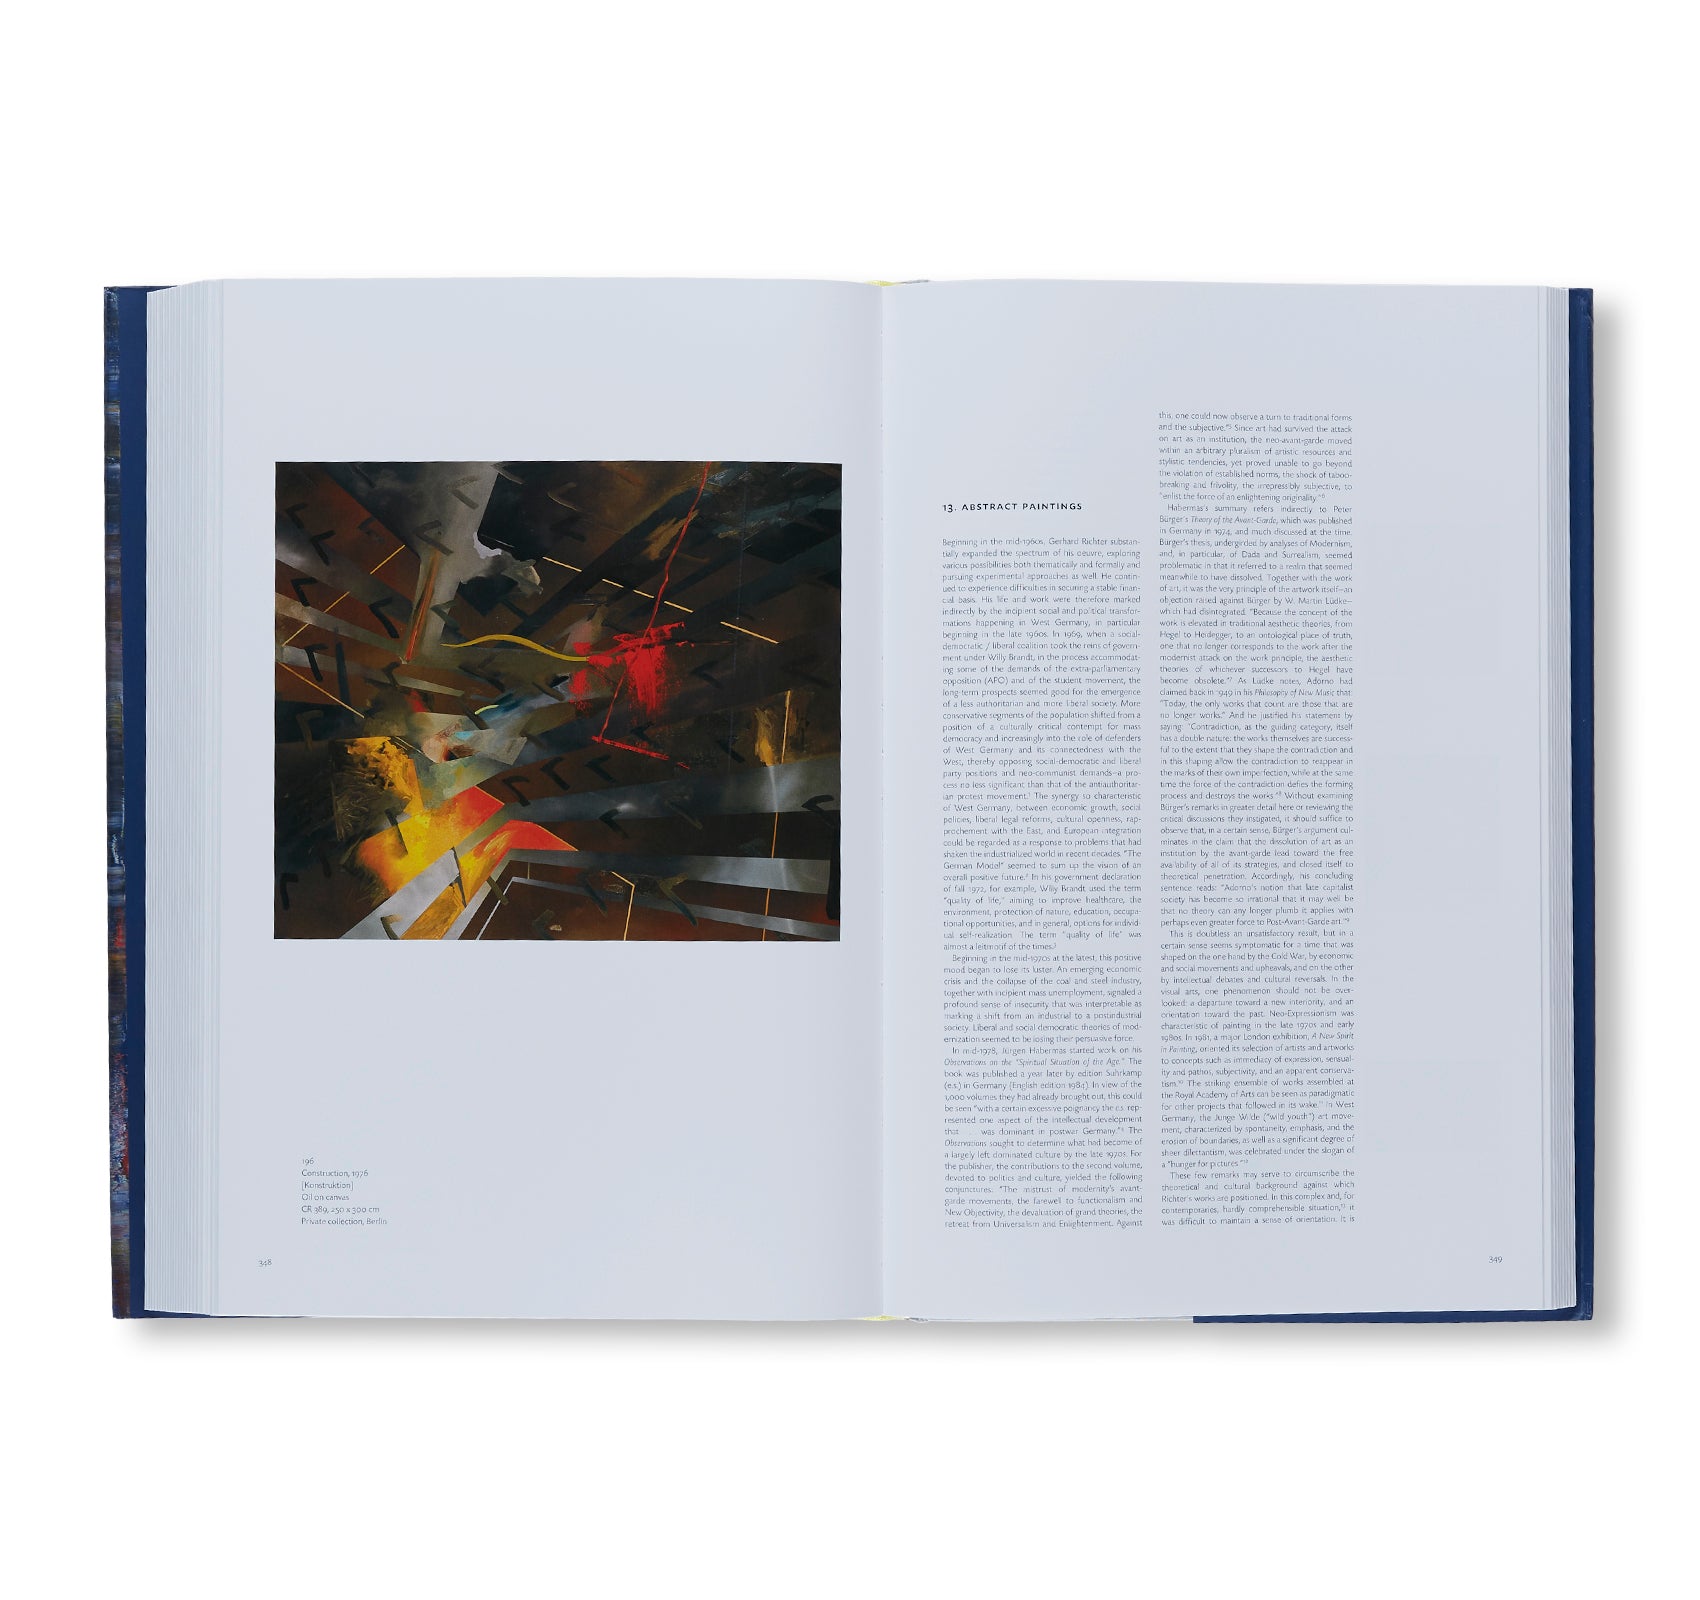 GERHARD RICHTER LIFE AND WORK: IN PAINTING THINKING IS PAINTING by Gerhard Richter